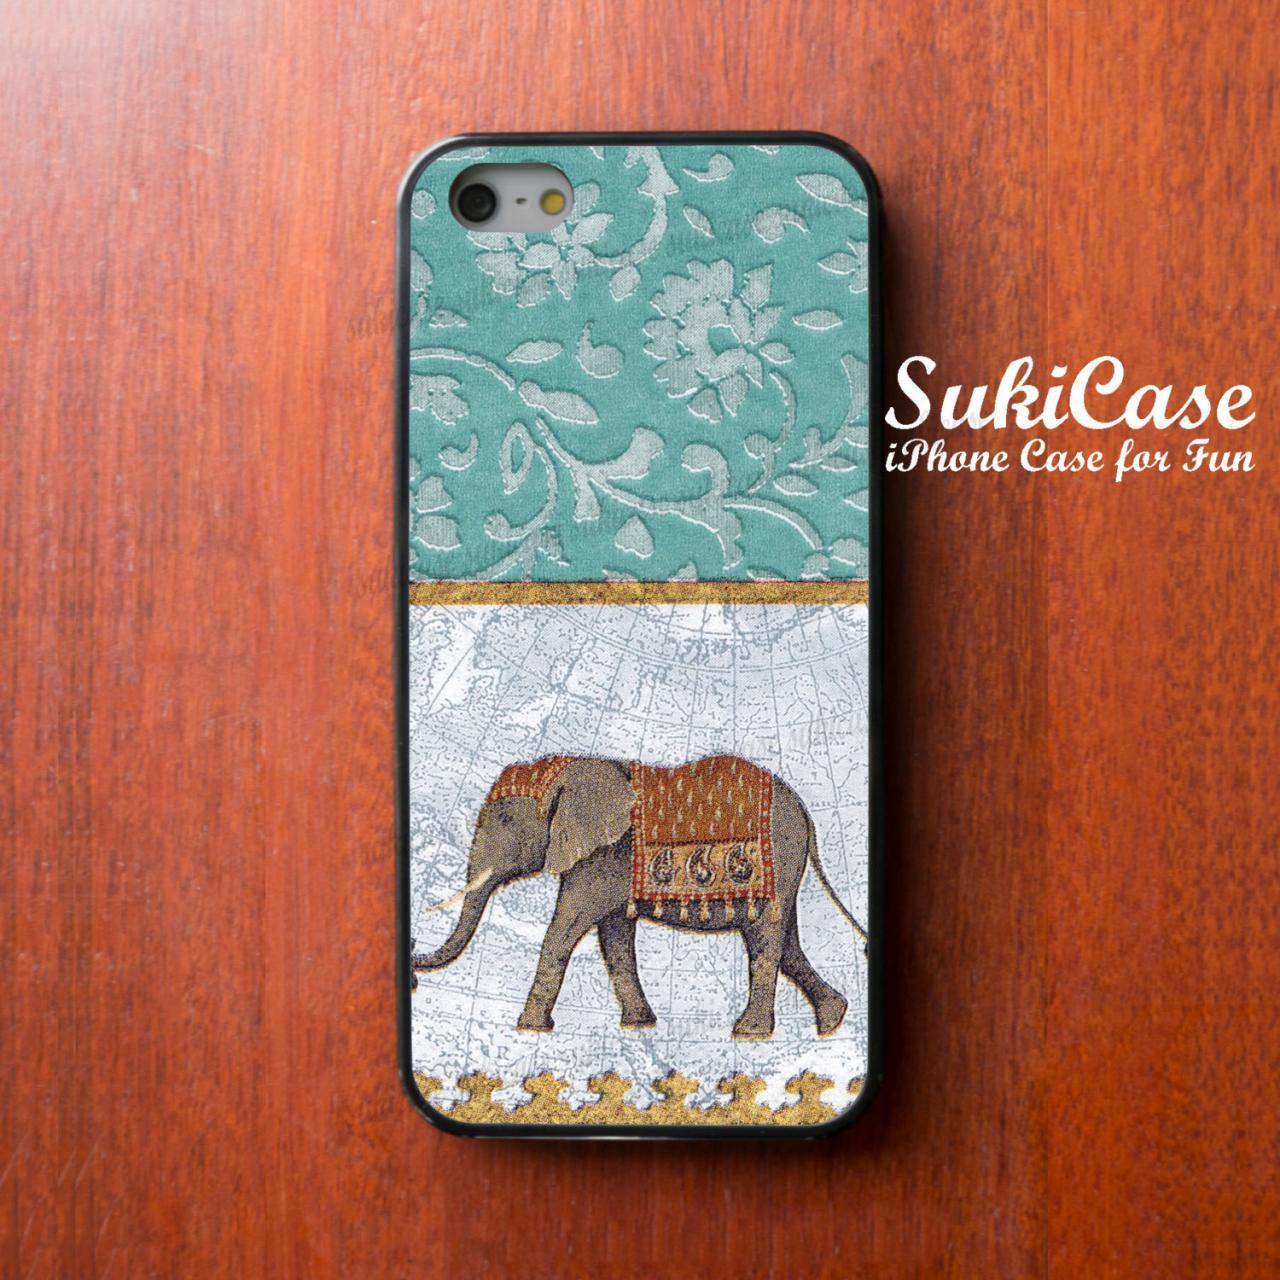 Elephant Iphone 5s Case With Light Blue Lace Pattern Iphone Cases Iphone 5 Case Iphone 4 Case Samsung Galaxy S4 Cover Iphone 5c Iphone 4s